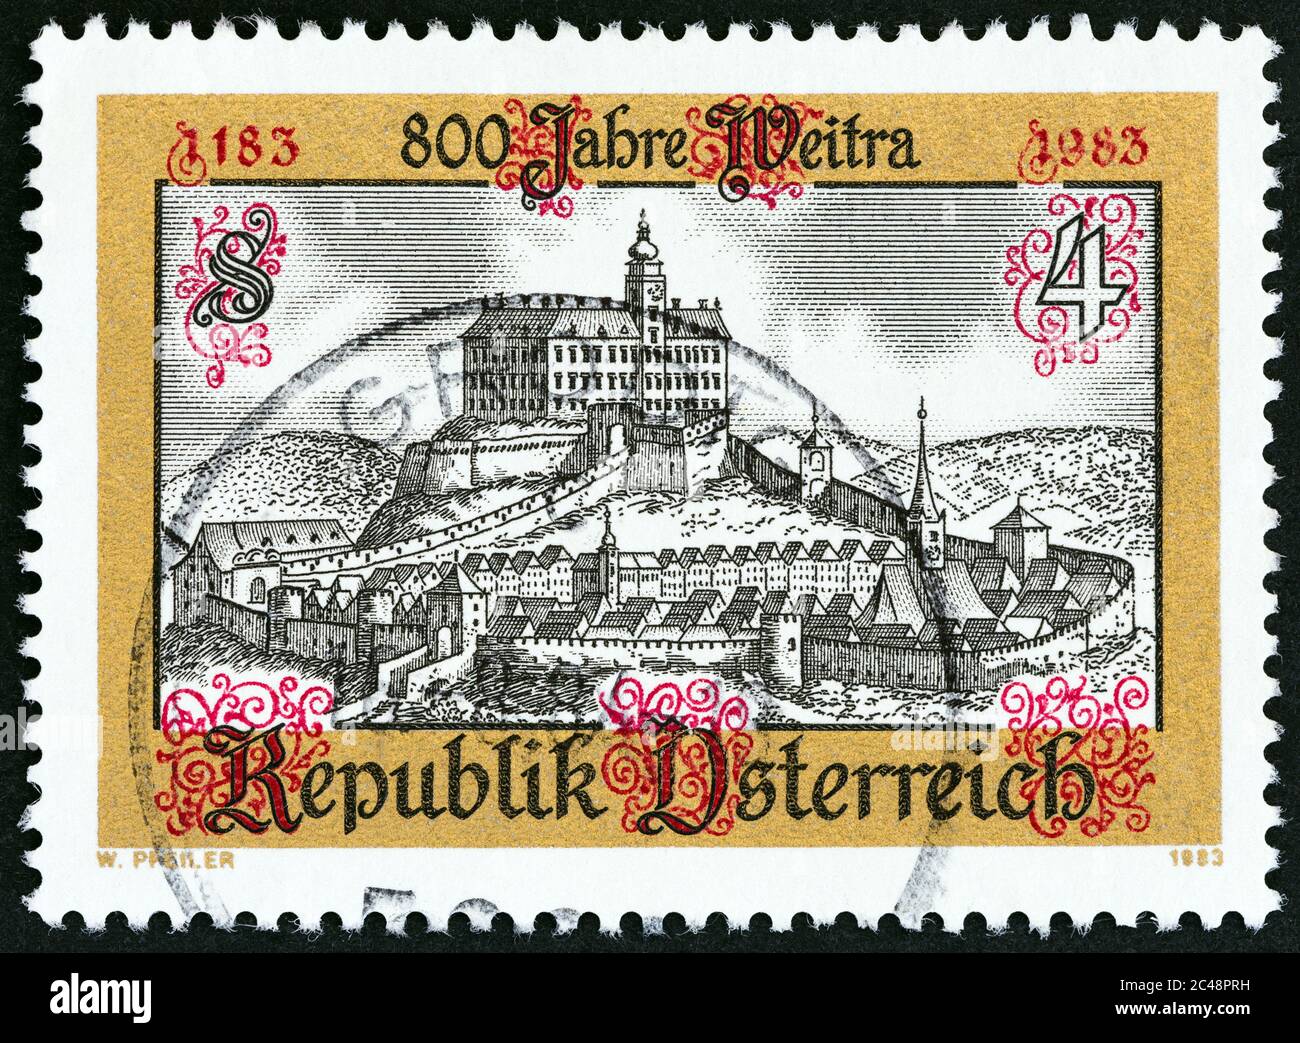 AUSTRIA - CIRCA 1983: A stamp printed in Austria issued for the 800th anniversary of Weitra shows Weitra, circa 1983. Stock Photo